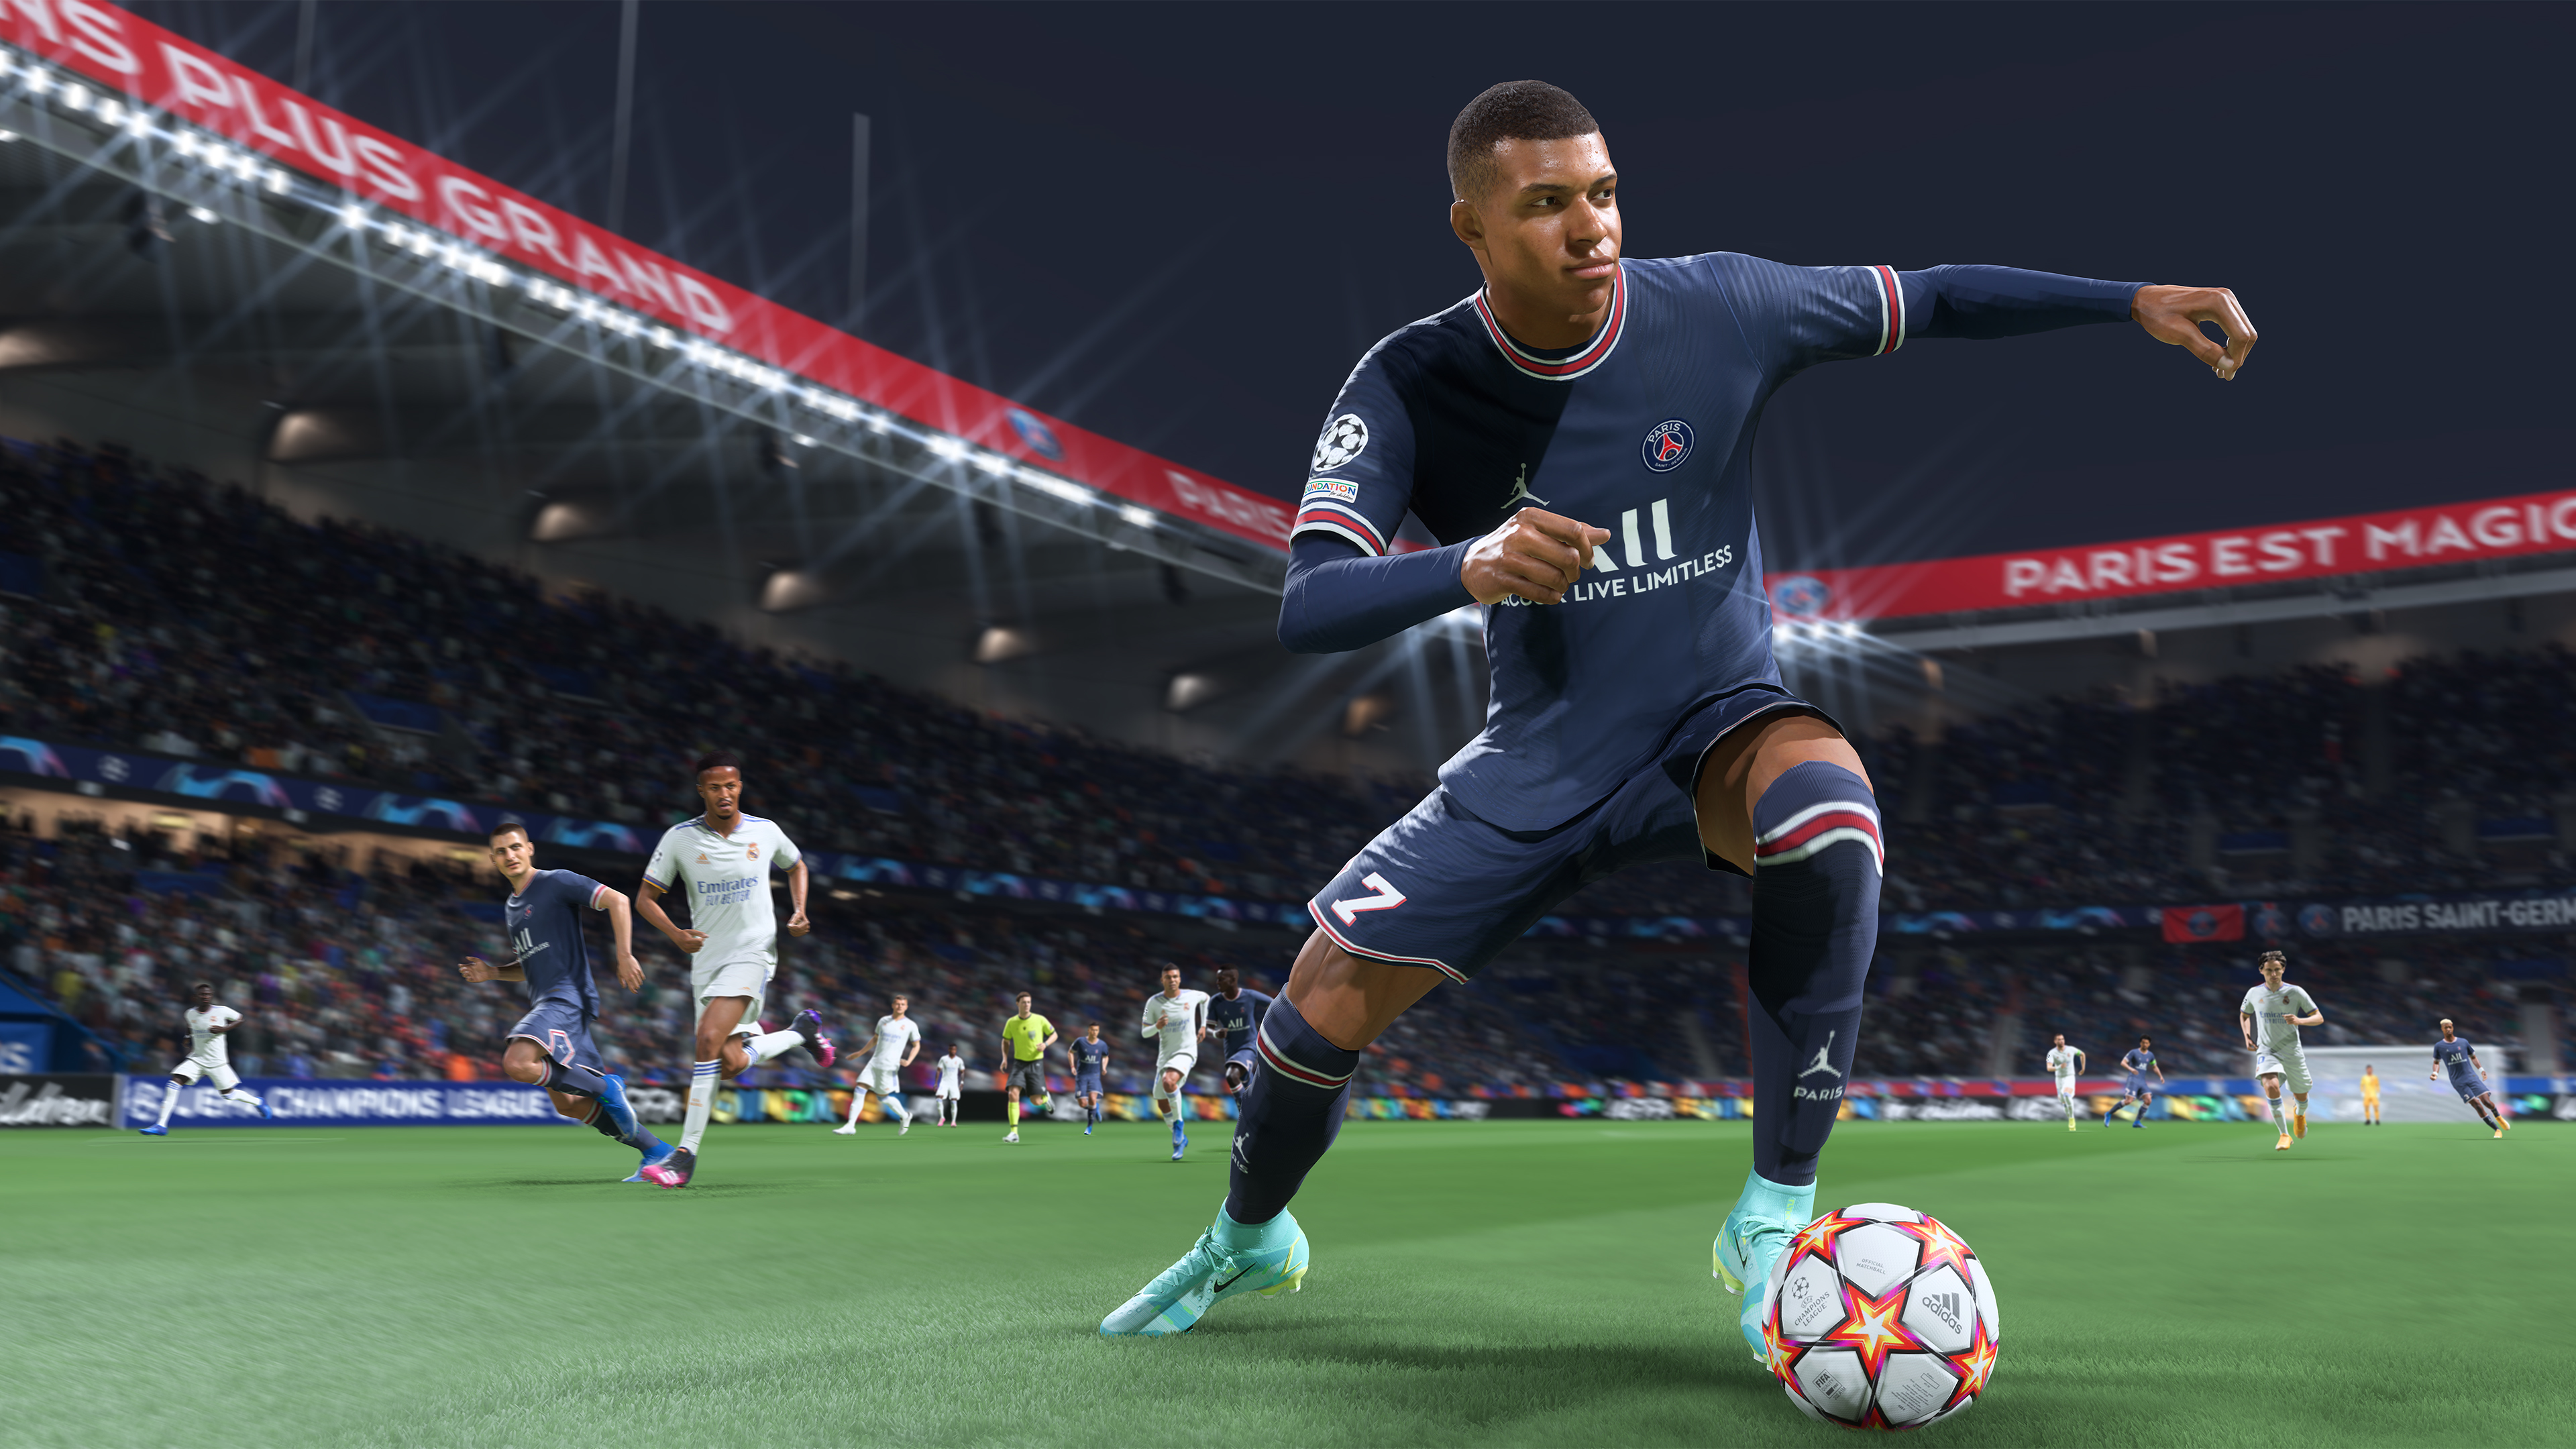 FIFA 22, Electronic Arts, PlayStation 5, [Physical], 014633742602 - image 2 of 3